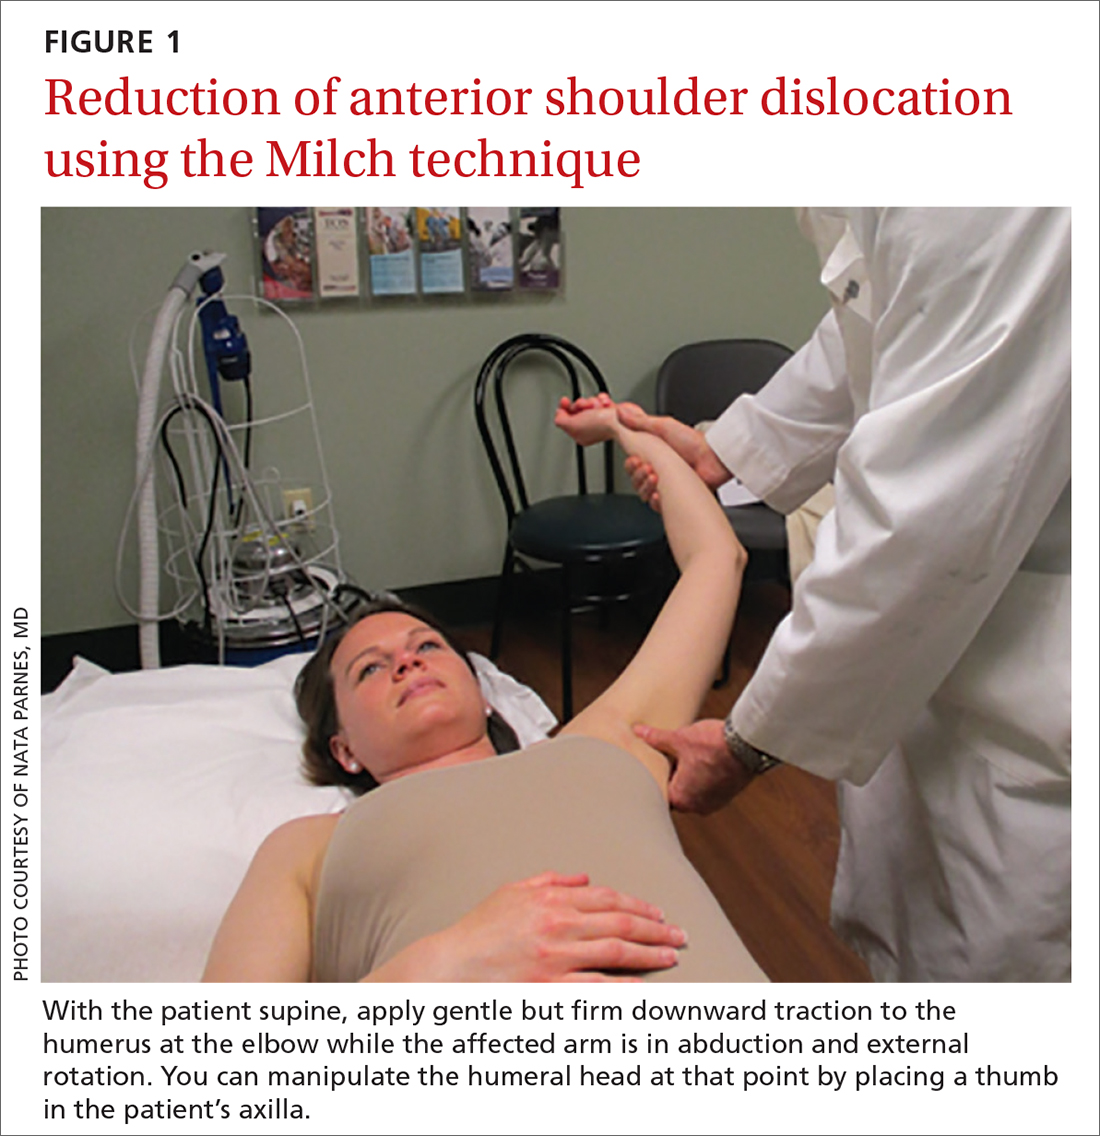 Reduction of anterior shoulder dislocation using the Milch technique